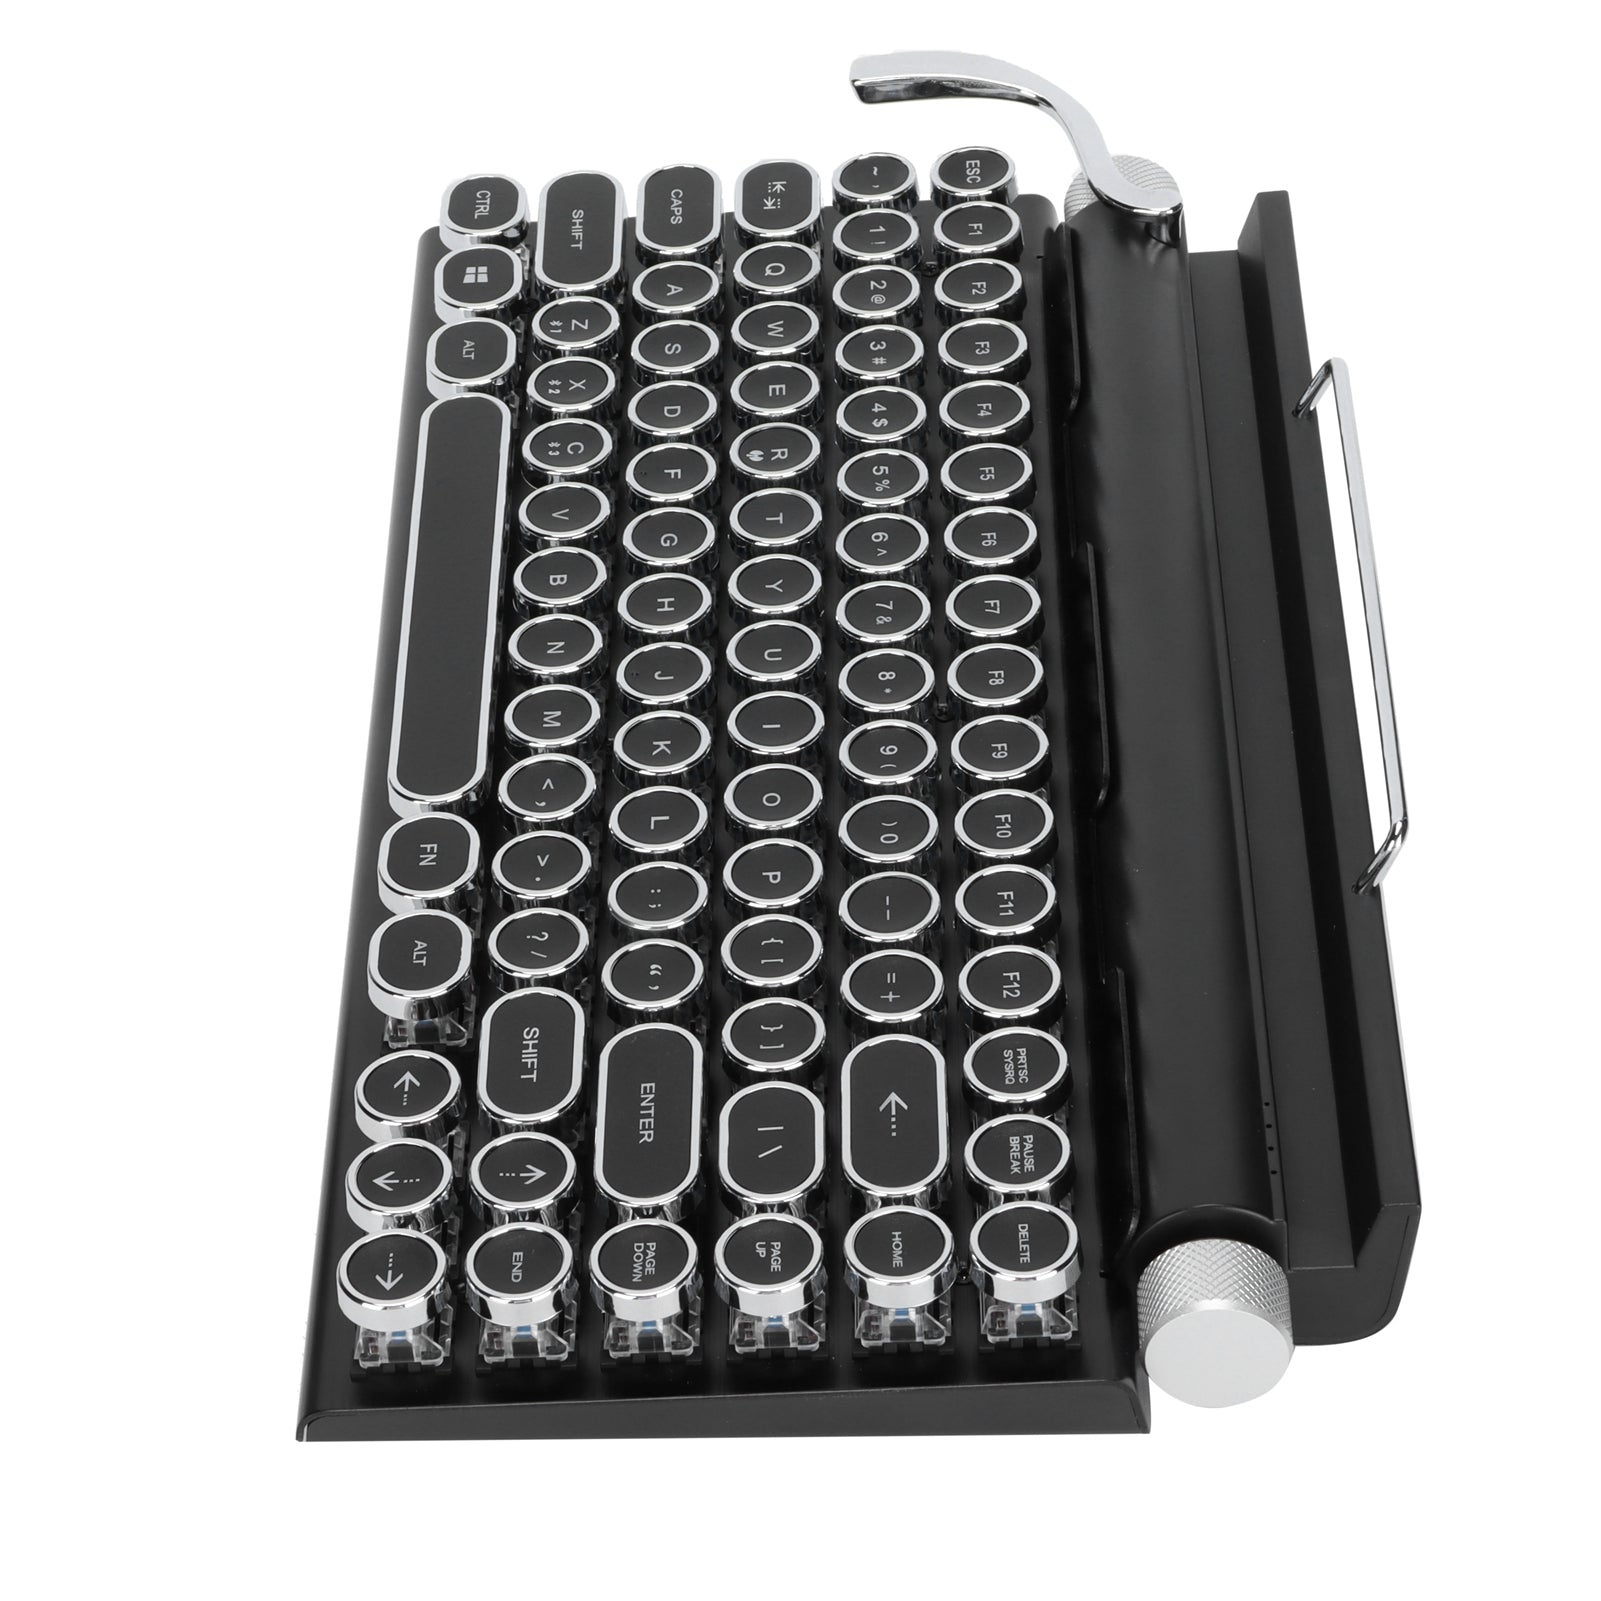 Retro Typewriter Keyboard with Screens up to 10.5 inches